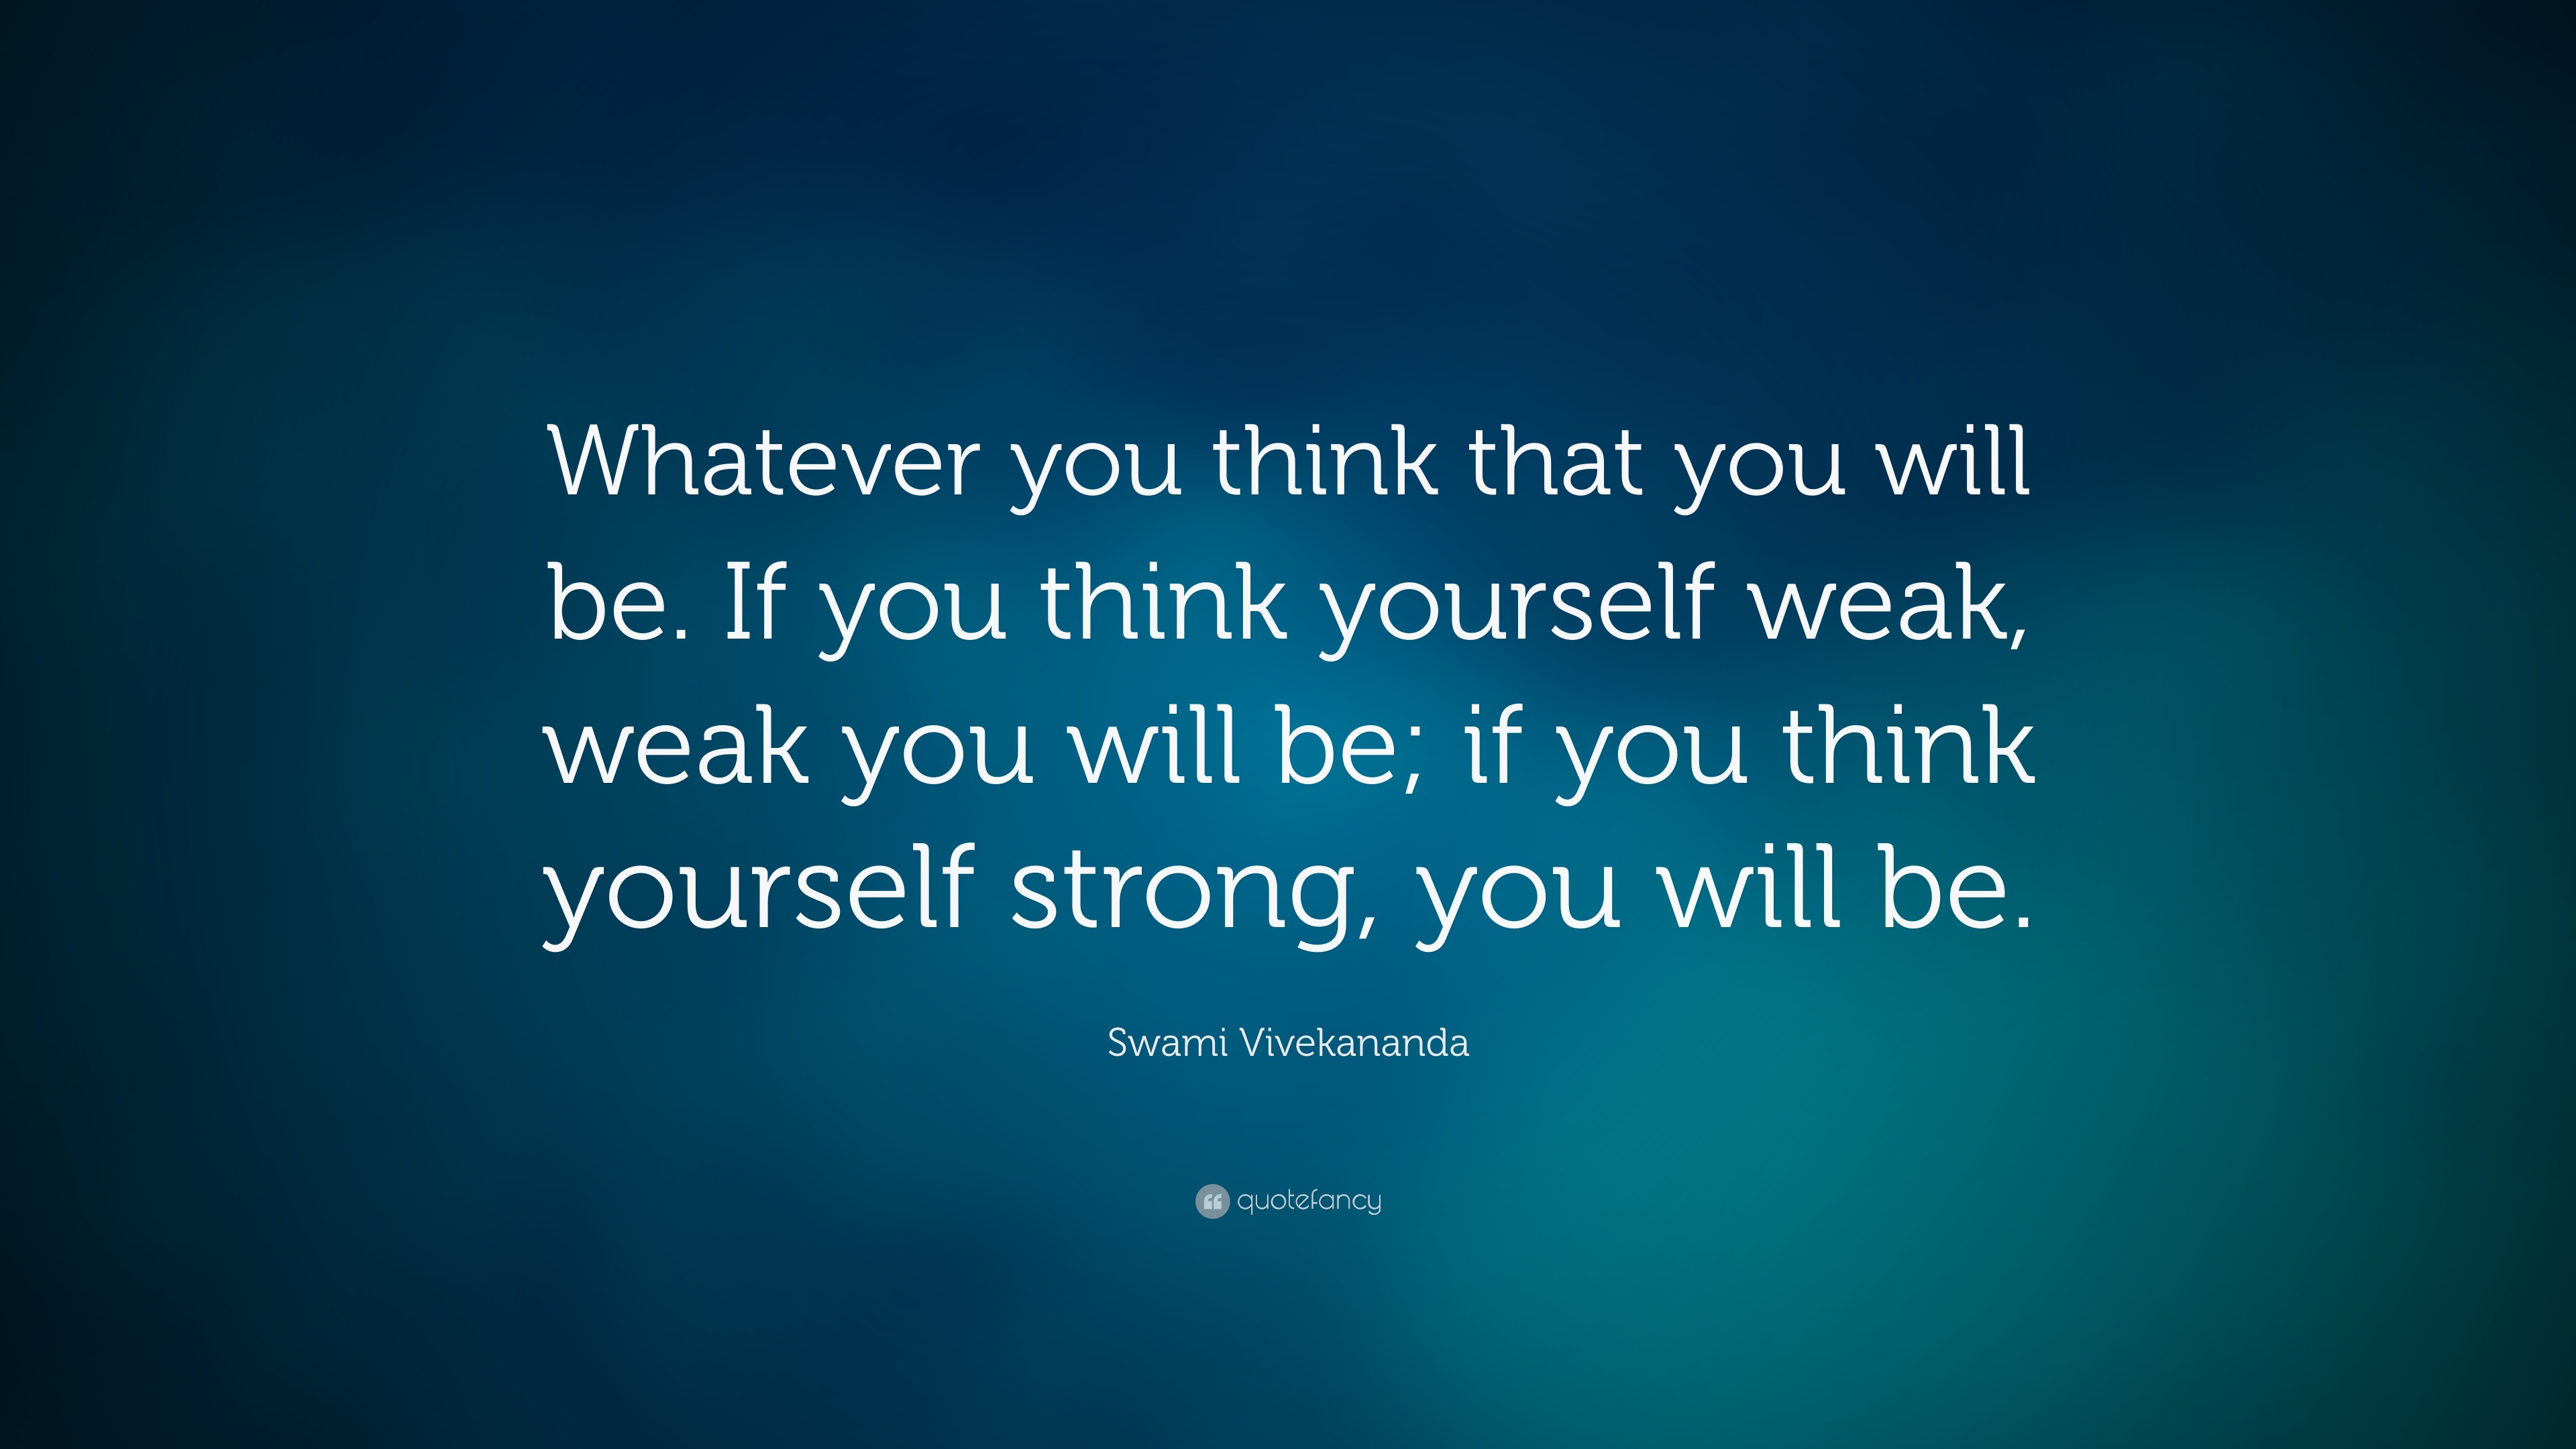 Swami Vivekananda Quote Whatever You Think That You Will Be If You Think Yourself Weak Weak You Will Be If You Think Yourself Strong You Wil